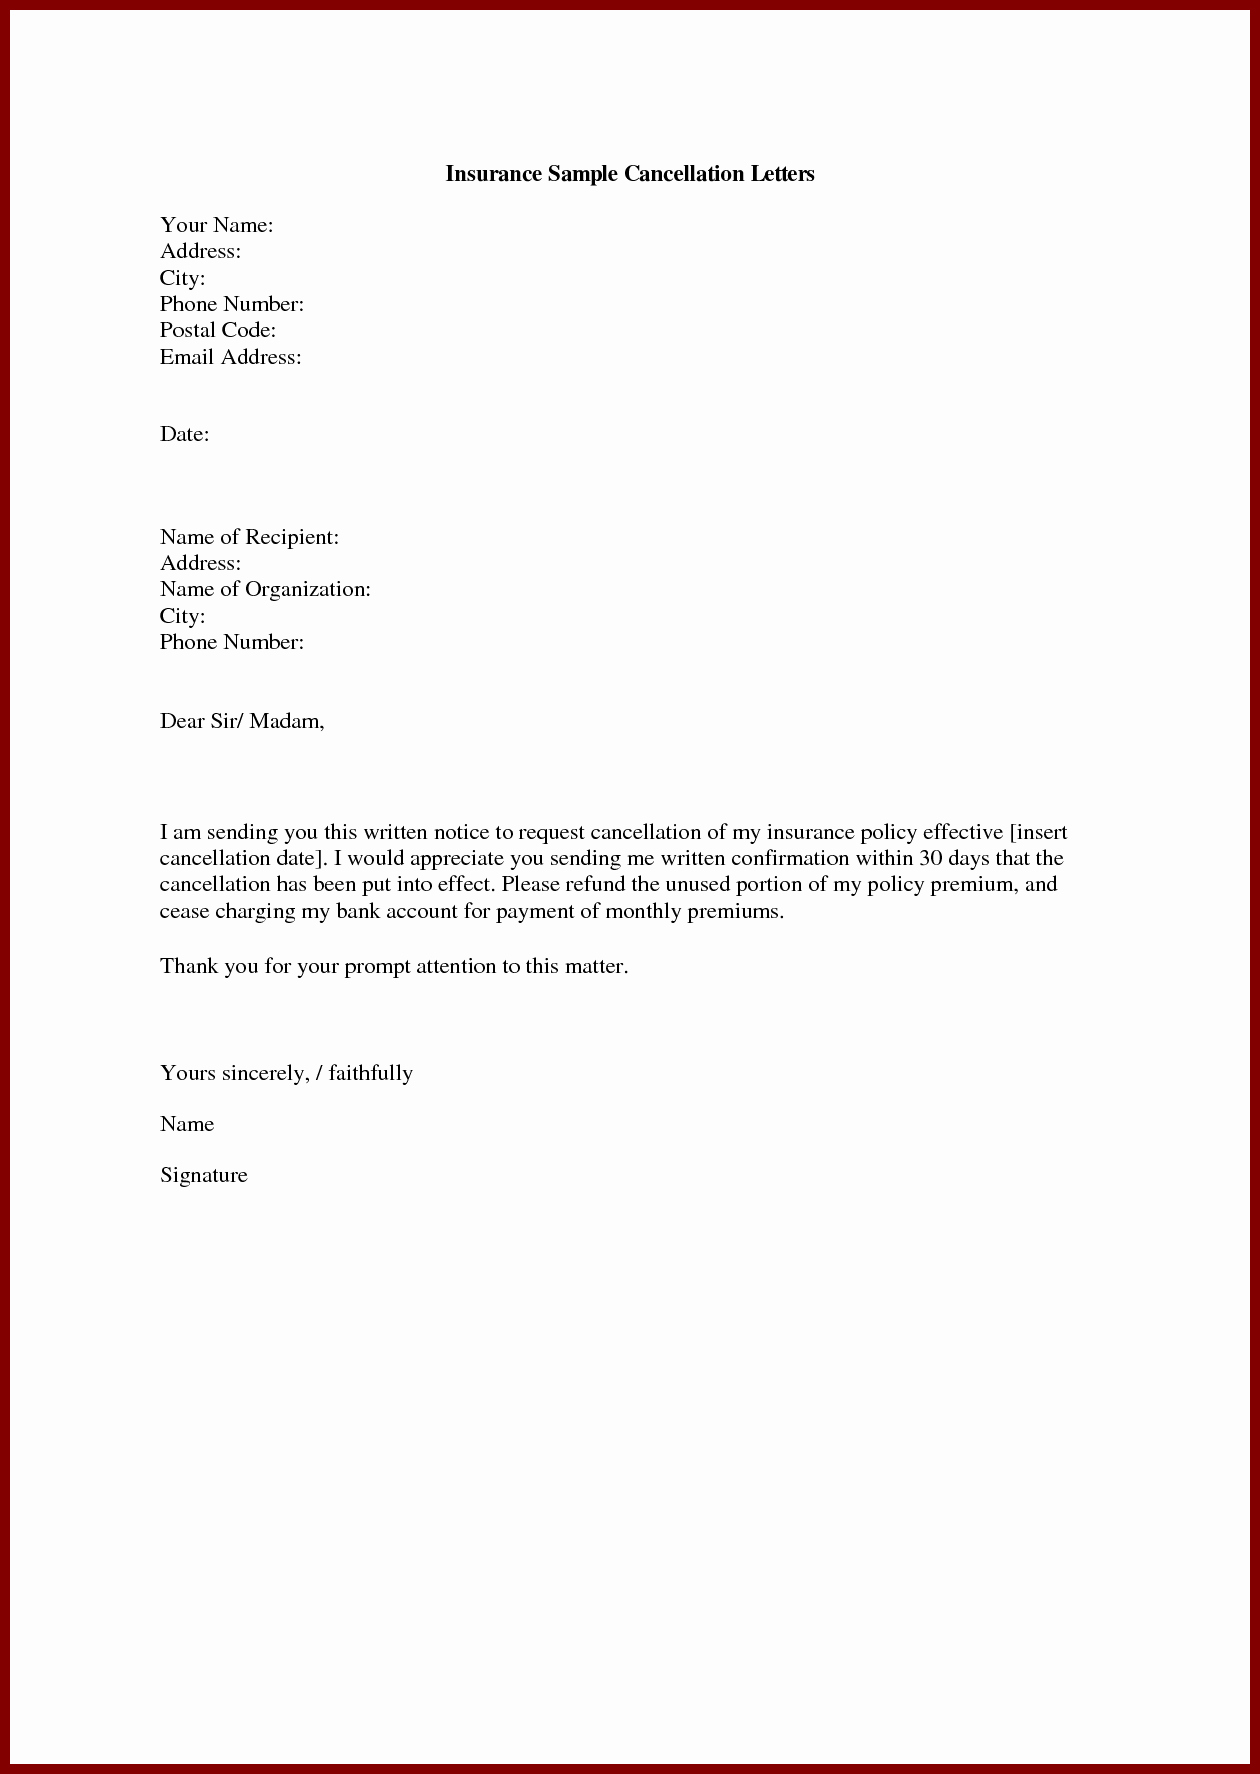 Insurance Cancellation Letter Template Samples | Letter ...